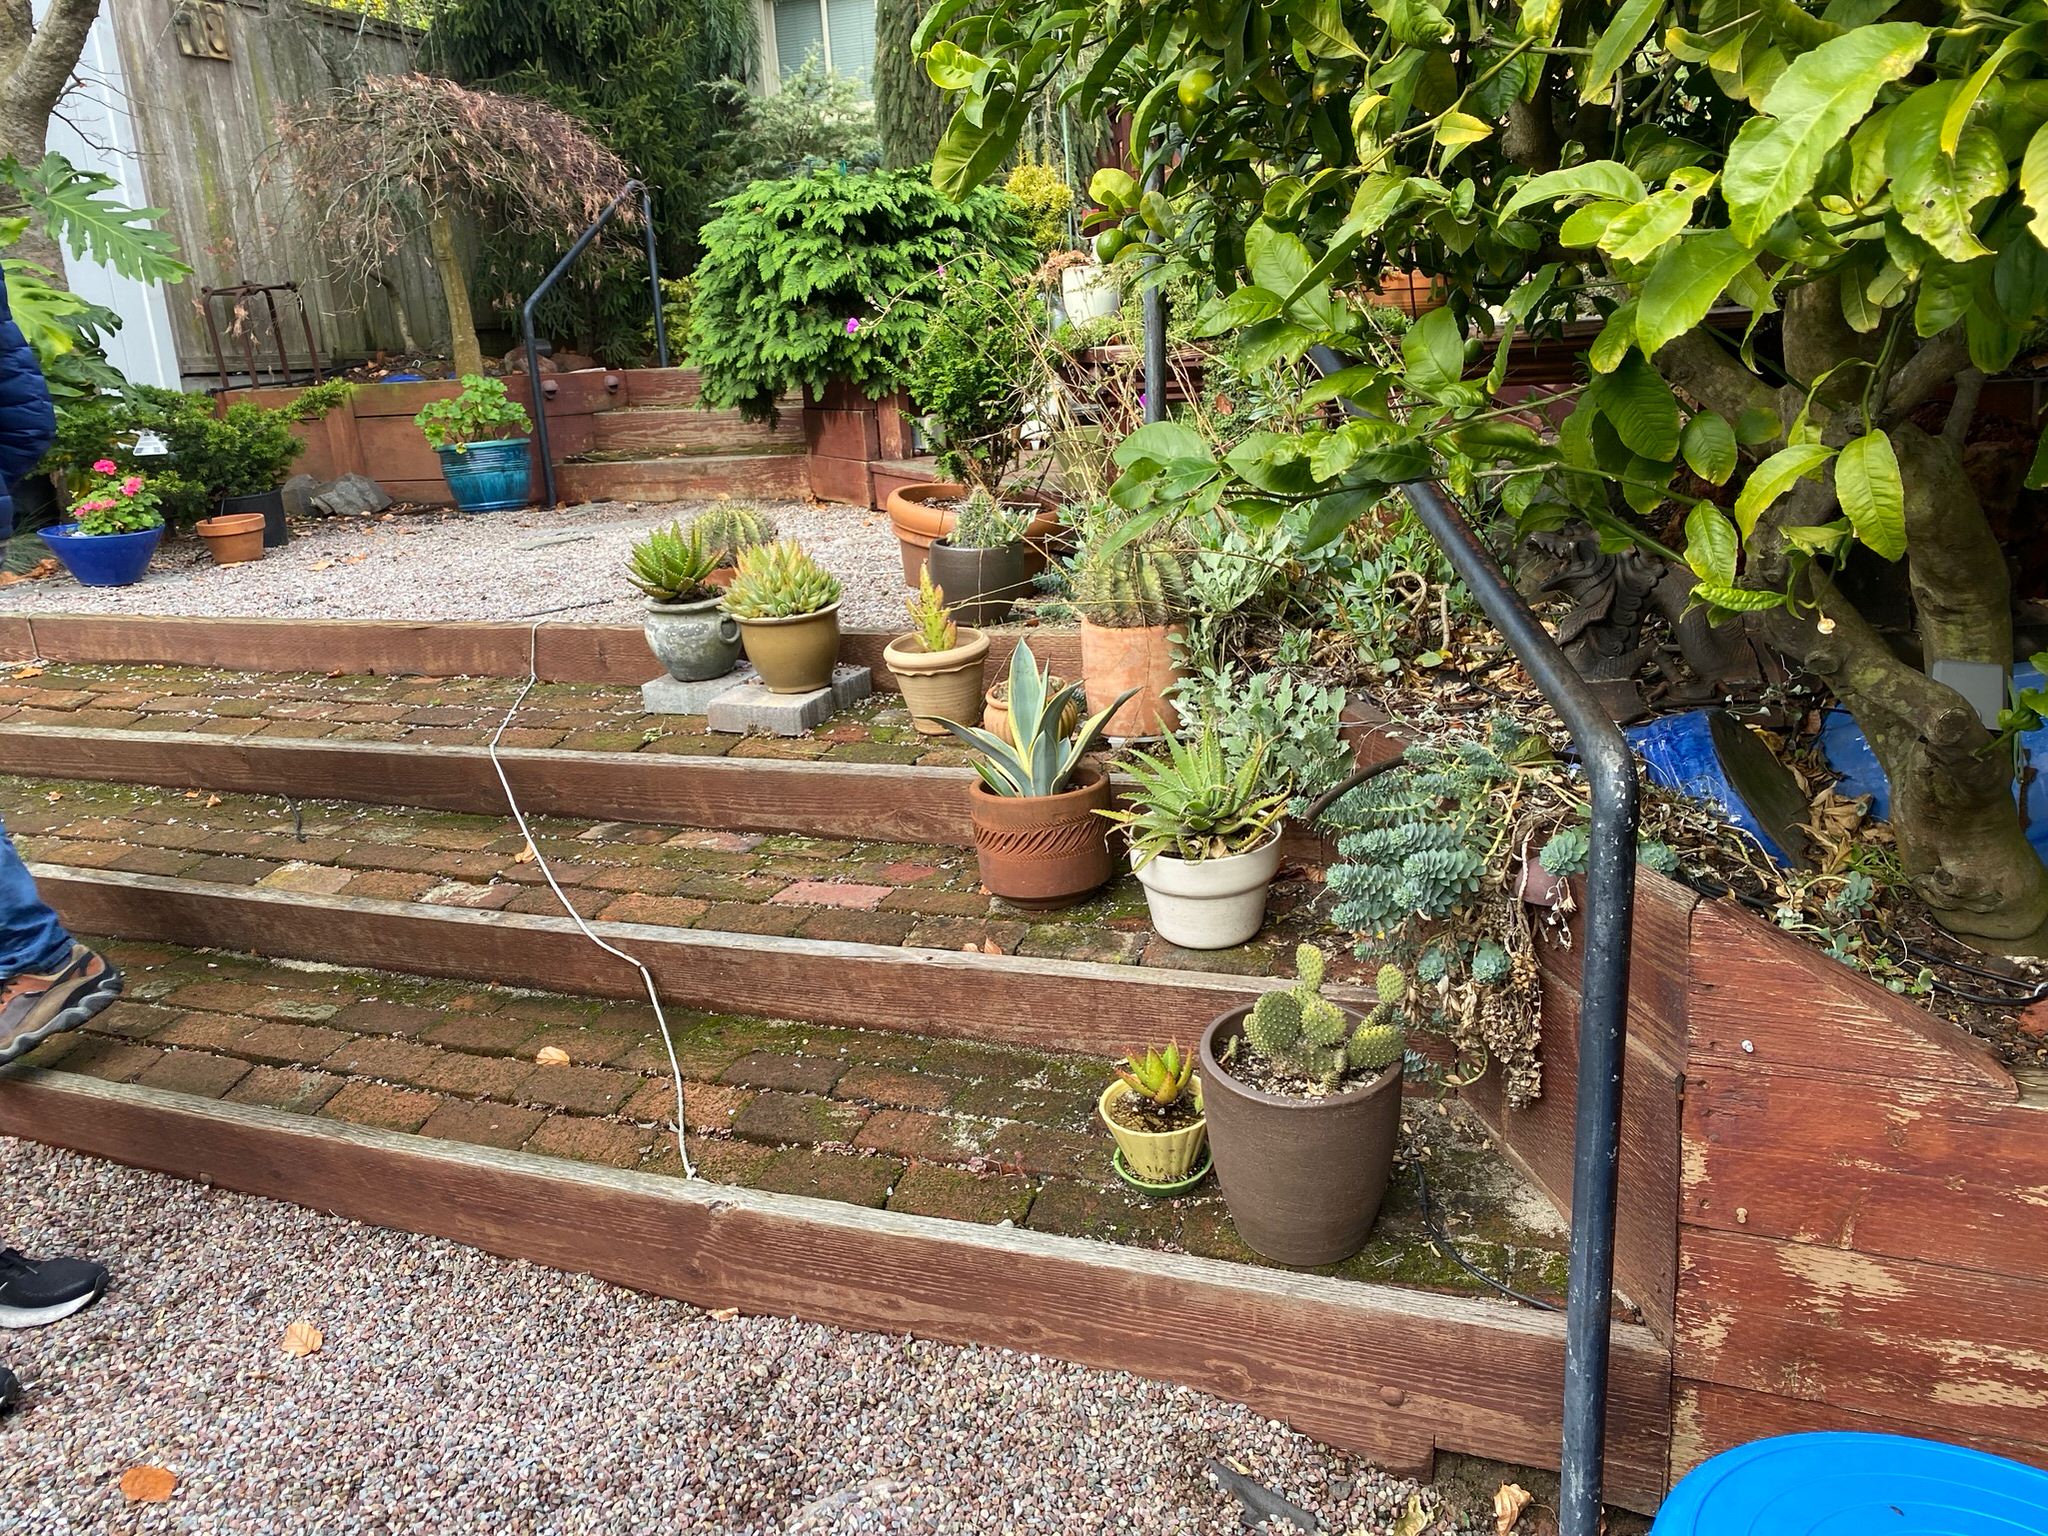 Backyard before make-over in Corona Heights, San Francisco. Three levels of worn brick stairs with decomposed granite on bottom and top landing and walkway.